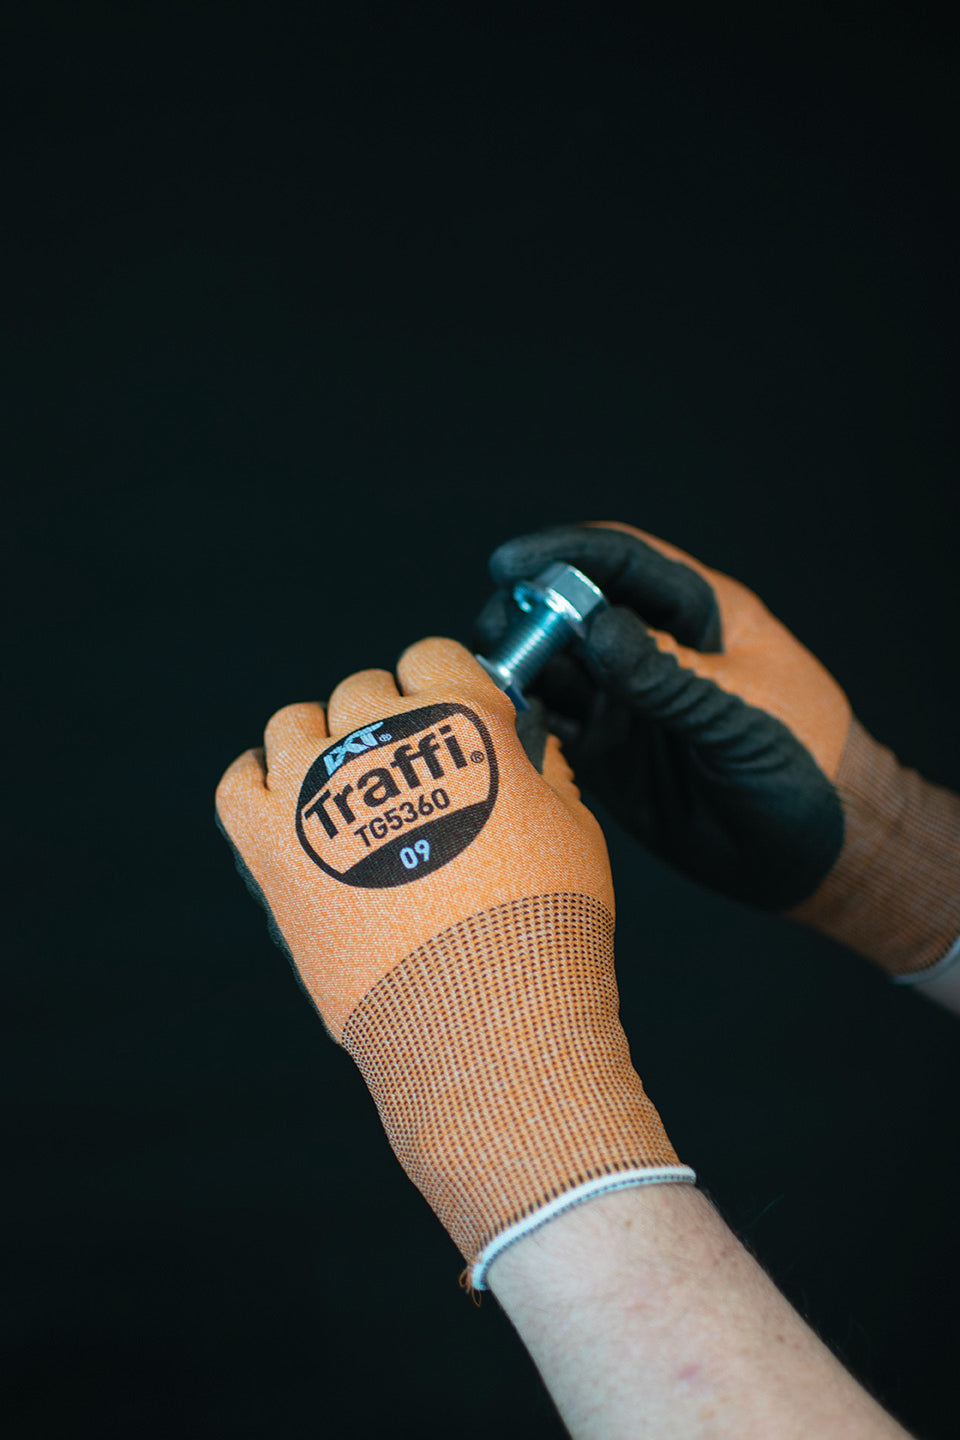 This Eco-friendly Traffi®TG5360 X-Dura LXT® Ultrafine Polyurethane Coated Orange 18-gauge Cut Level A3 Safety Gloves are Carbon Neutral Certified, repels water and oil while providing touchscreen compatibility. 